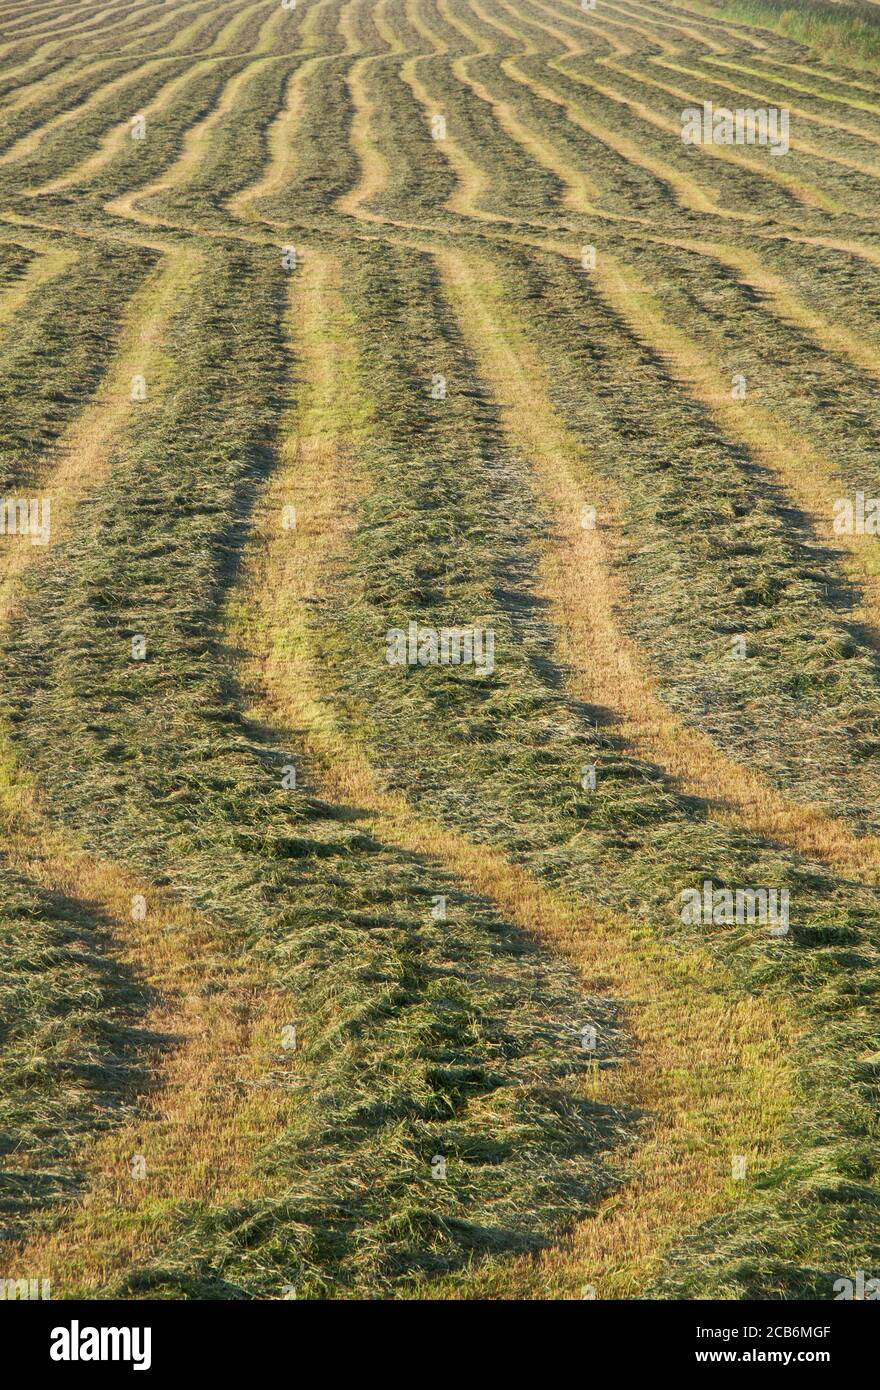 Grassland with raked mown grass for haymaking Stock Photo